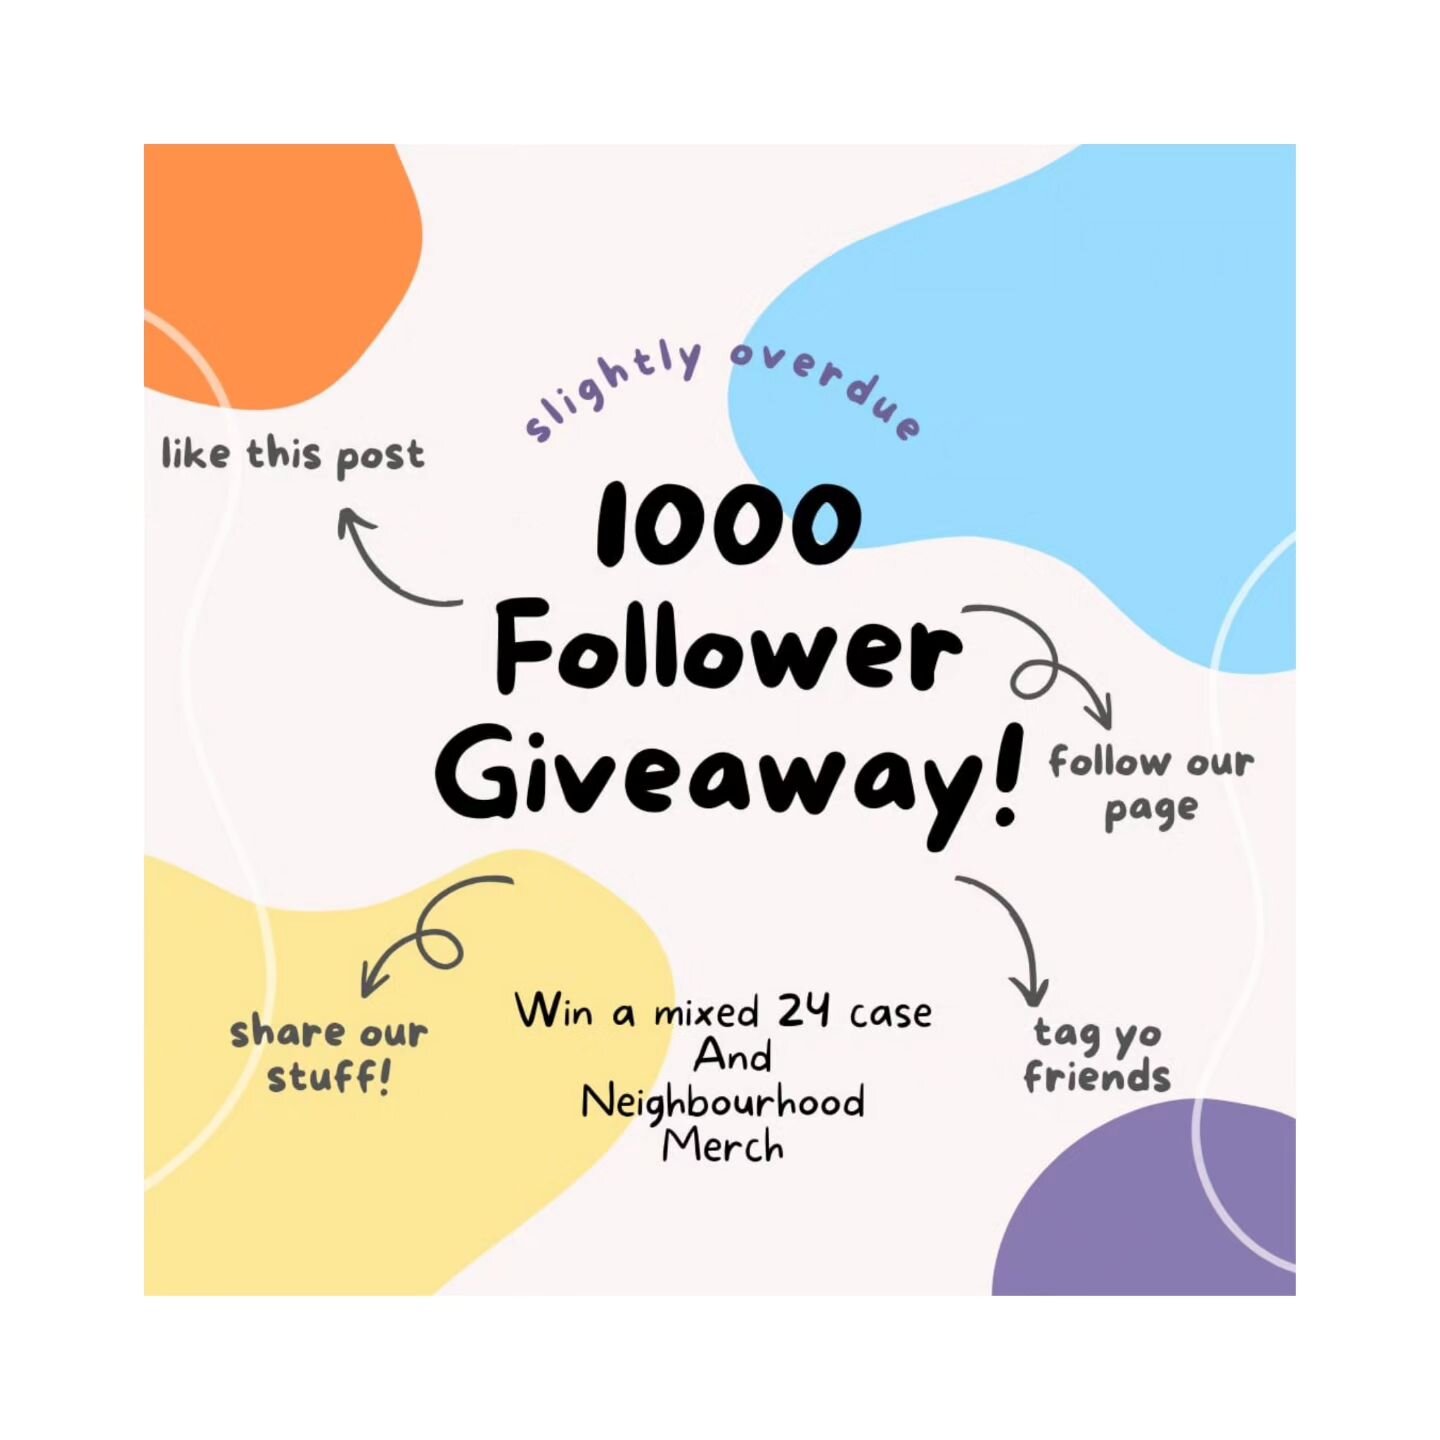 // GIVEAWAY TIME // 1000 FOLLOWERS 🎉

We have reached our first Instagram milestone - 1000 followers 😱 honestly this means so much to our small team and we feel the love! So we wanna give a little summit back 🤩

24 cans are up for grabs &amp; some